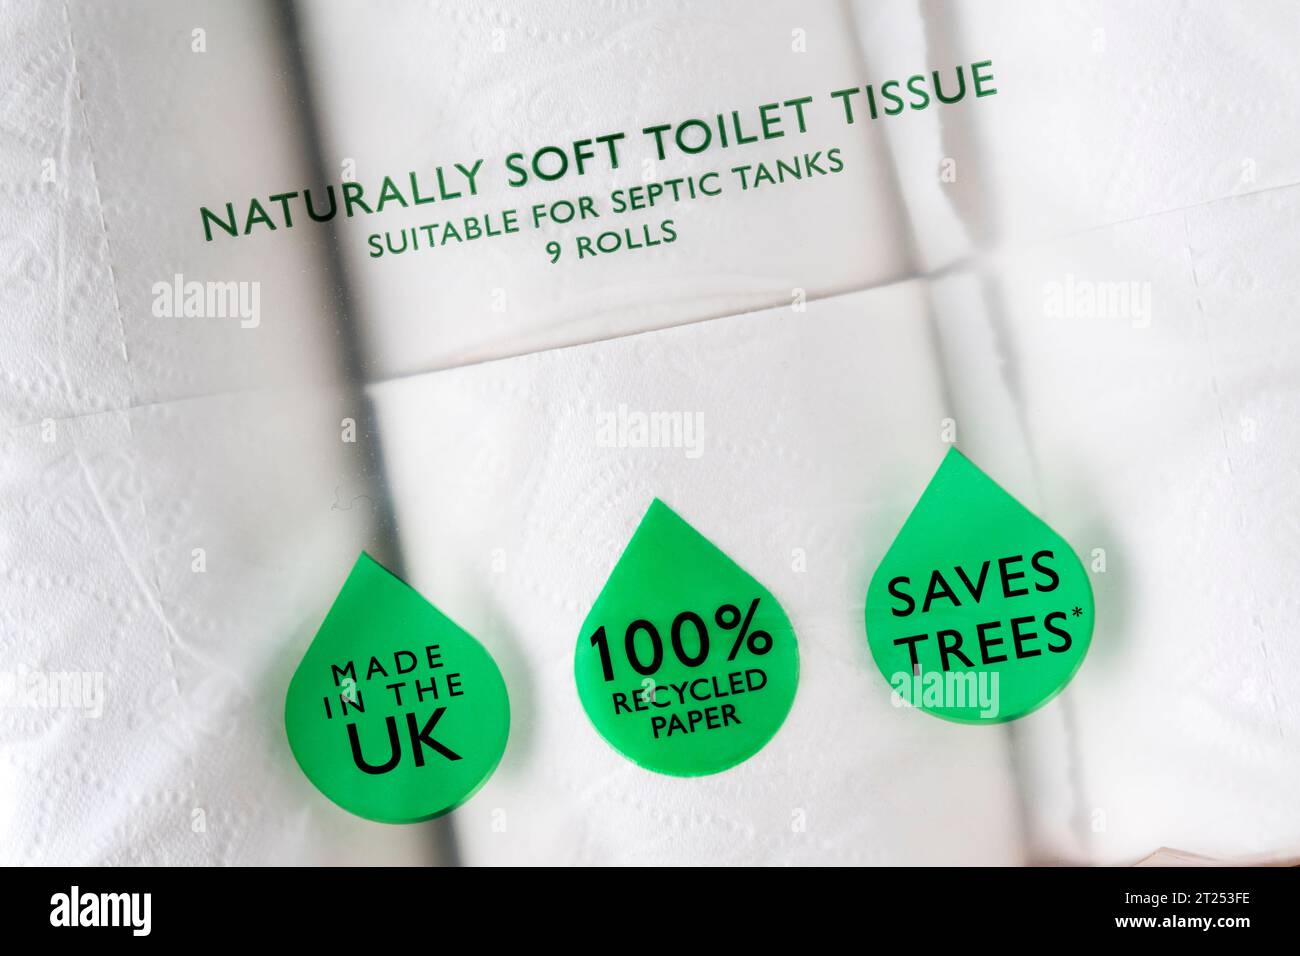 Soft toilet paper, advertised as suitable for use with a septic tank. Stock Photo